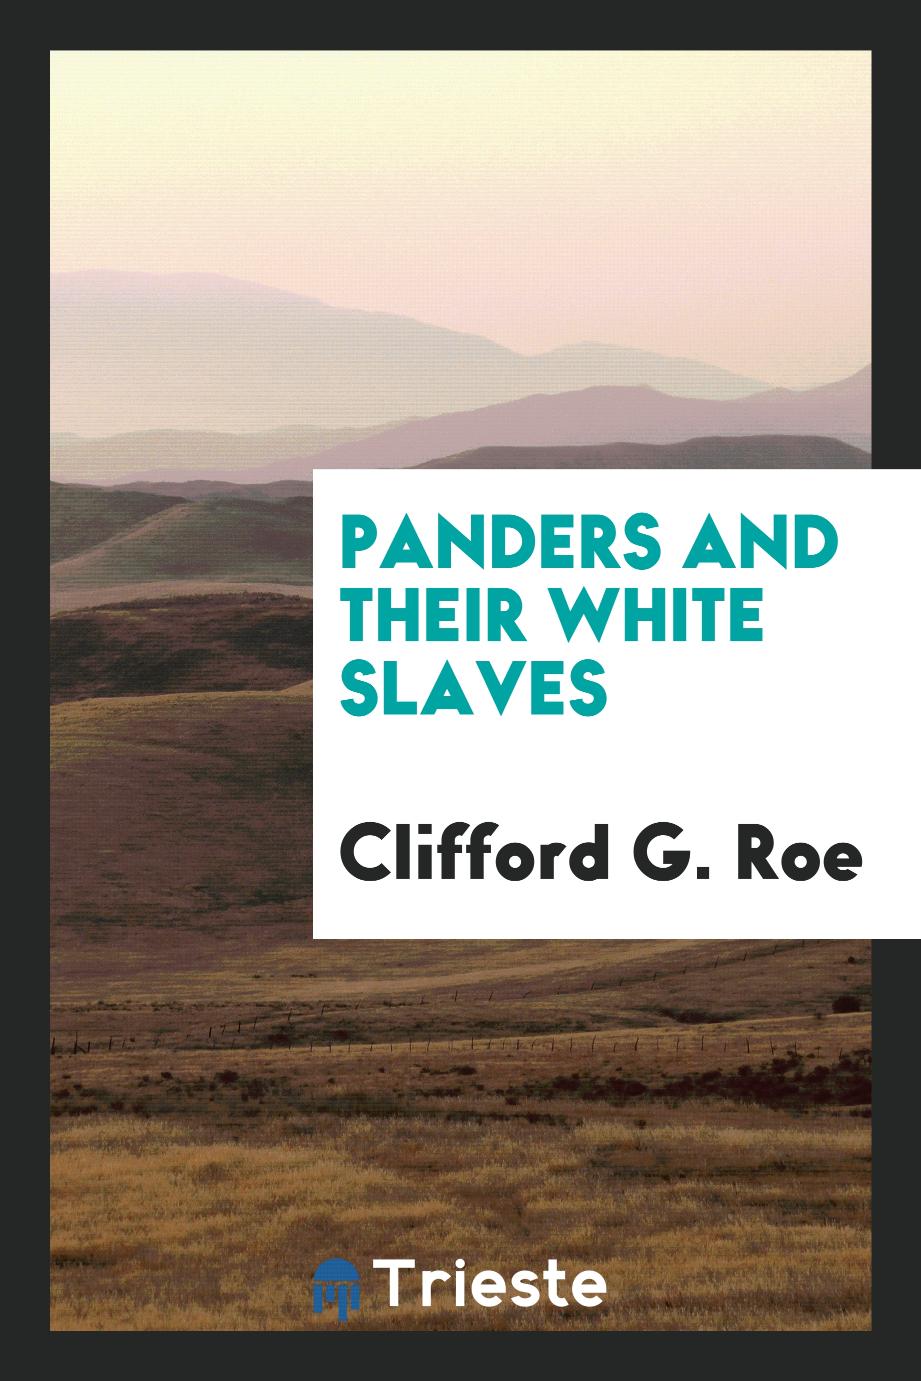 Panders and their white slaves